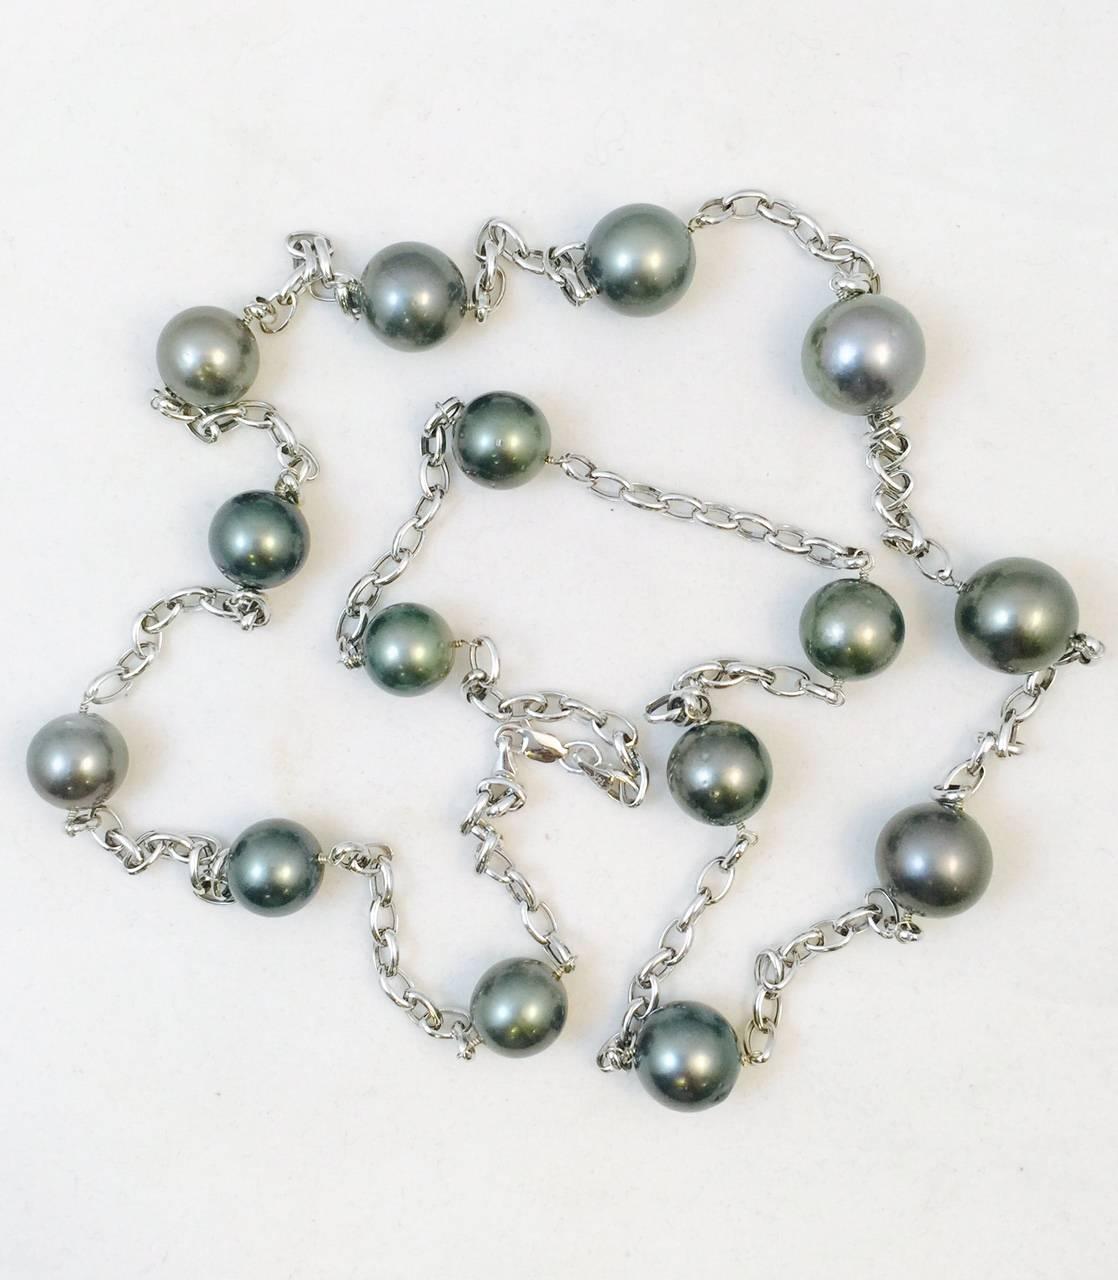 A glorious addition to any fine jewelry lovers collection.  Pearls are such a wonderful staple!  This fantastic necklace boasts fifteen cultured South Sea black pearls measuring an impressive 12-15MM each. The 14K white gold 38